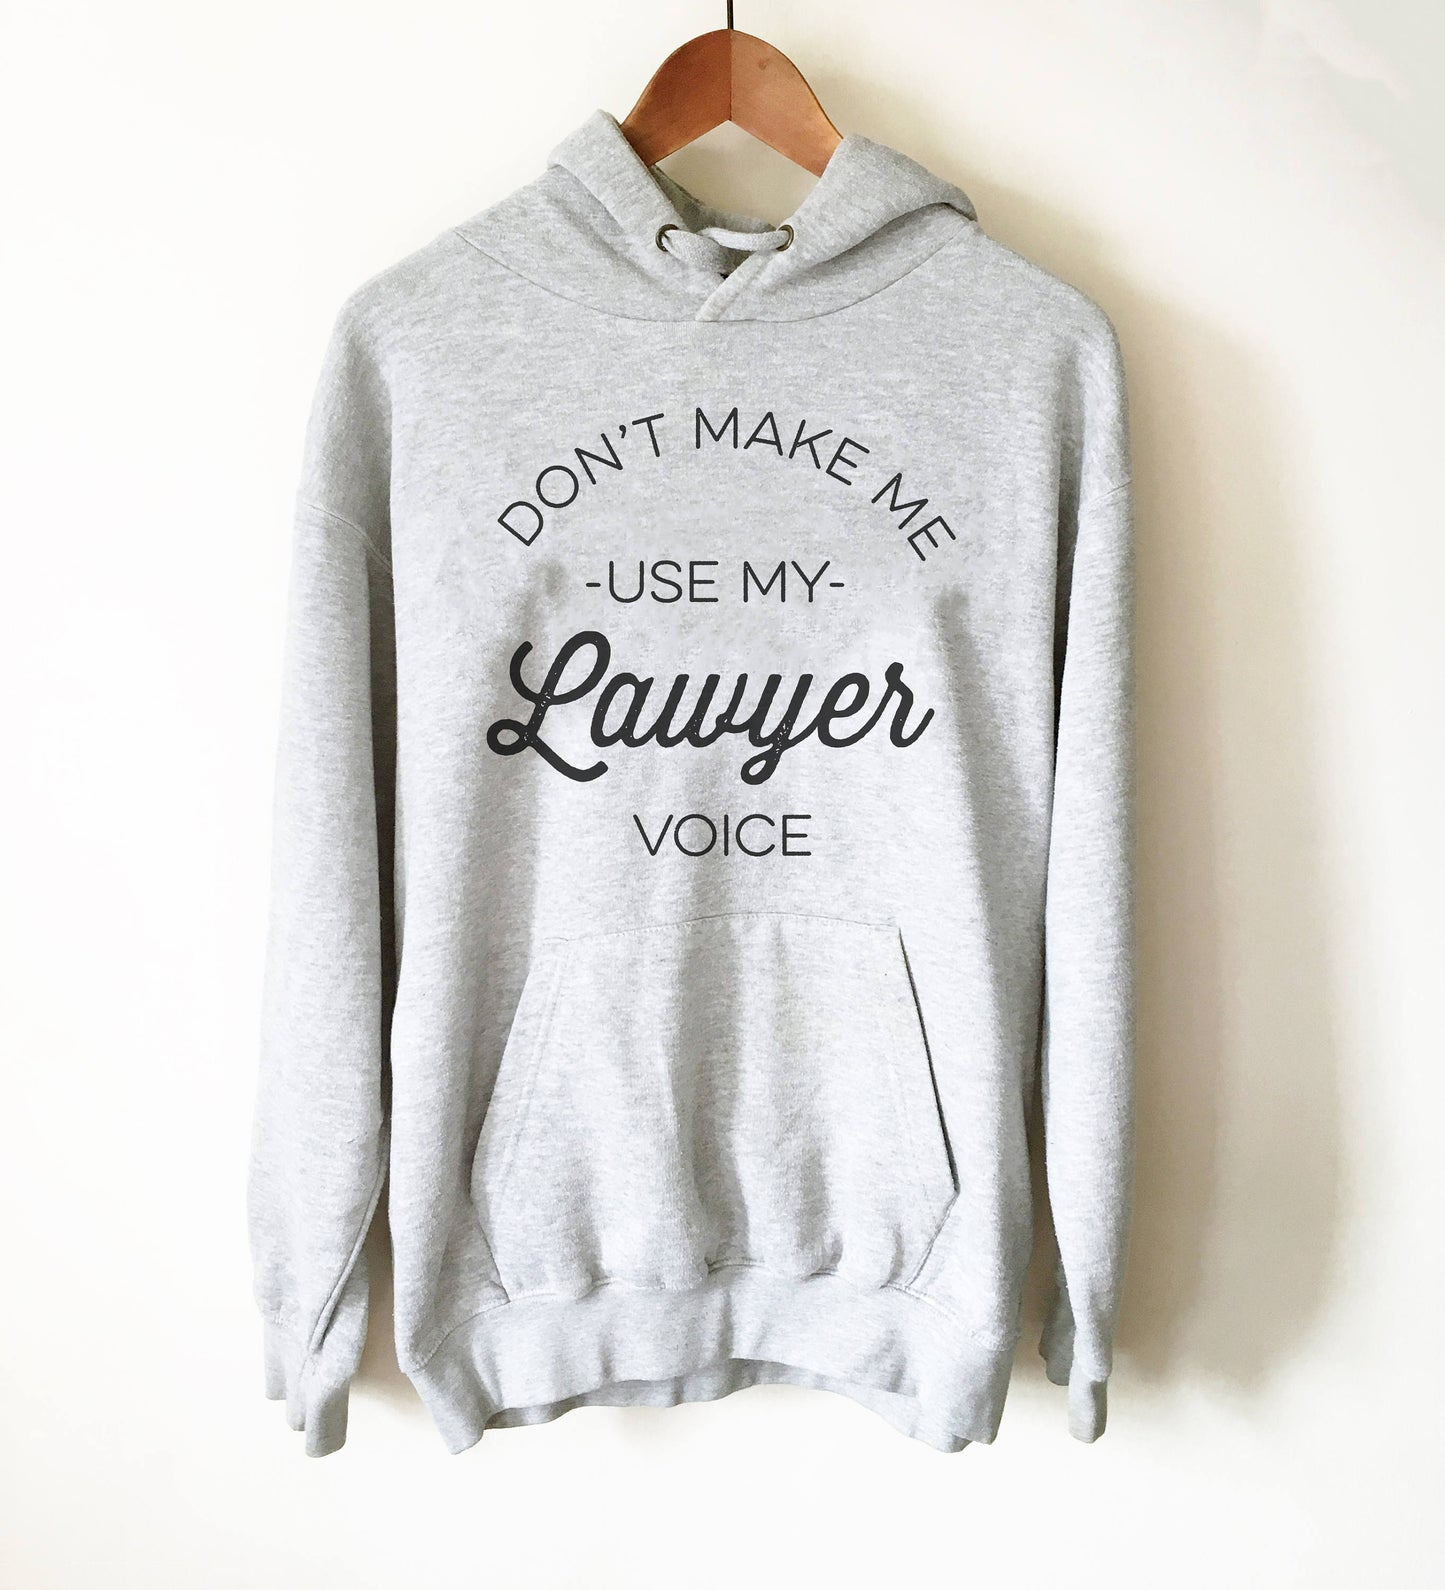 Don't Make Me Use My Lawyer Voice Hoodie - Lawyer Shirt, Lawyer Gift, Law School, College Student Gift, Law Student, Graduation Gift